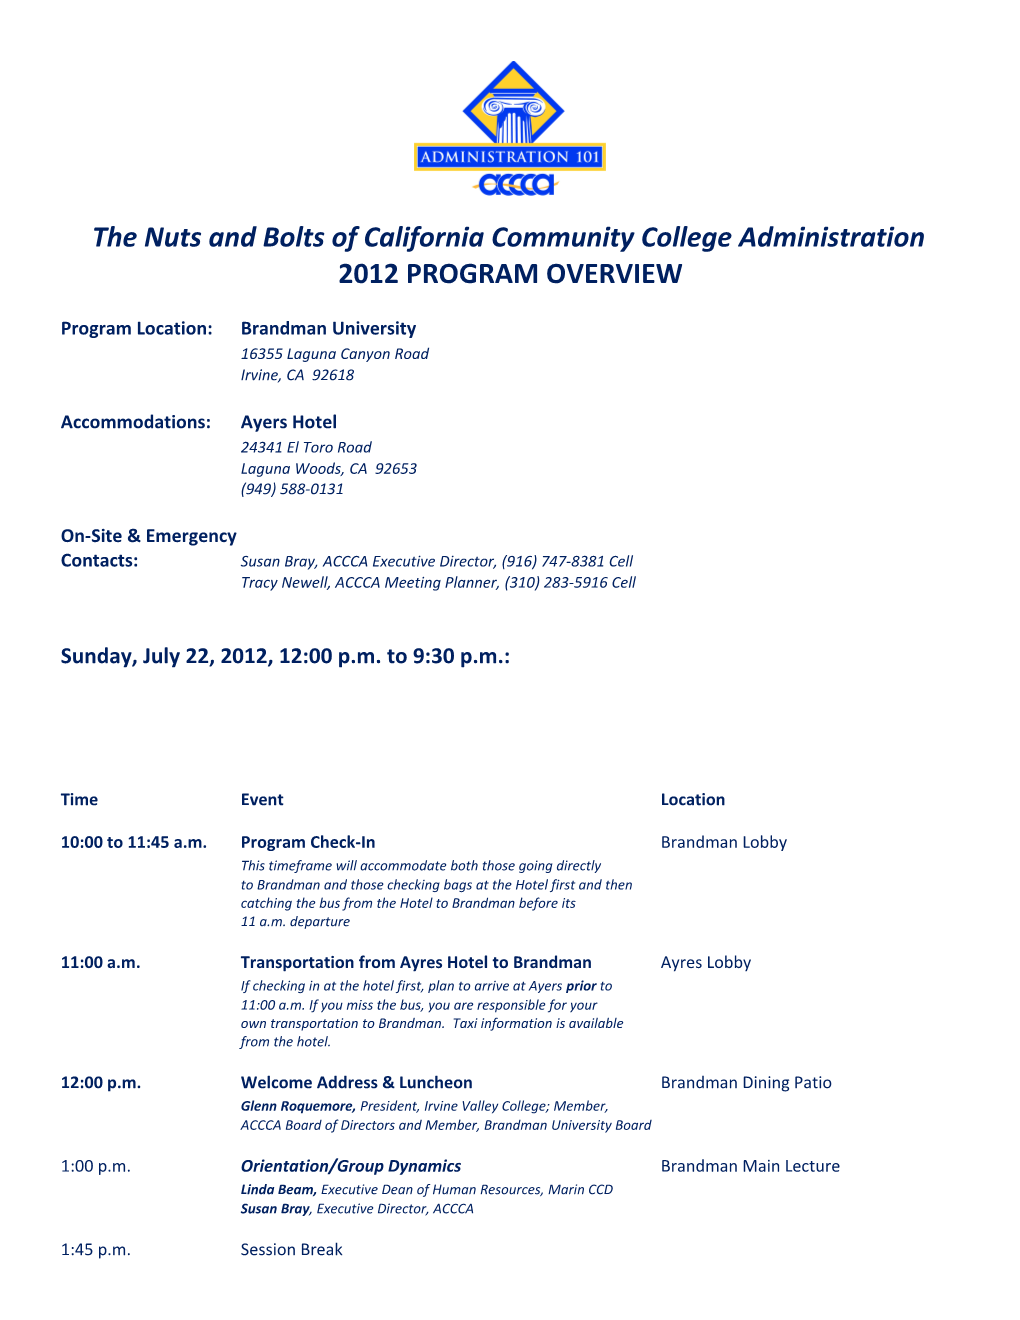 The Nuts and Bolts of California Community College Administration